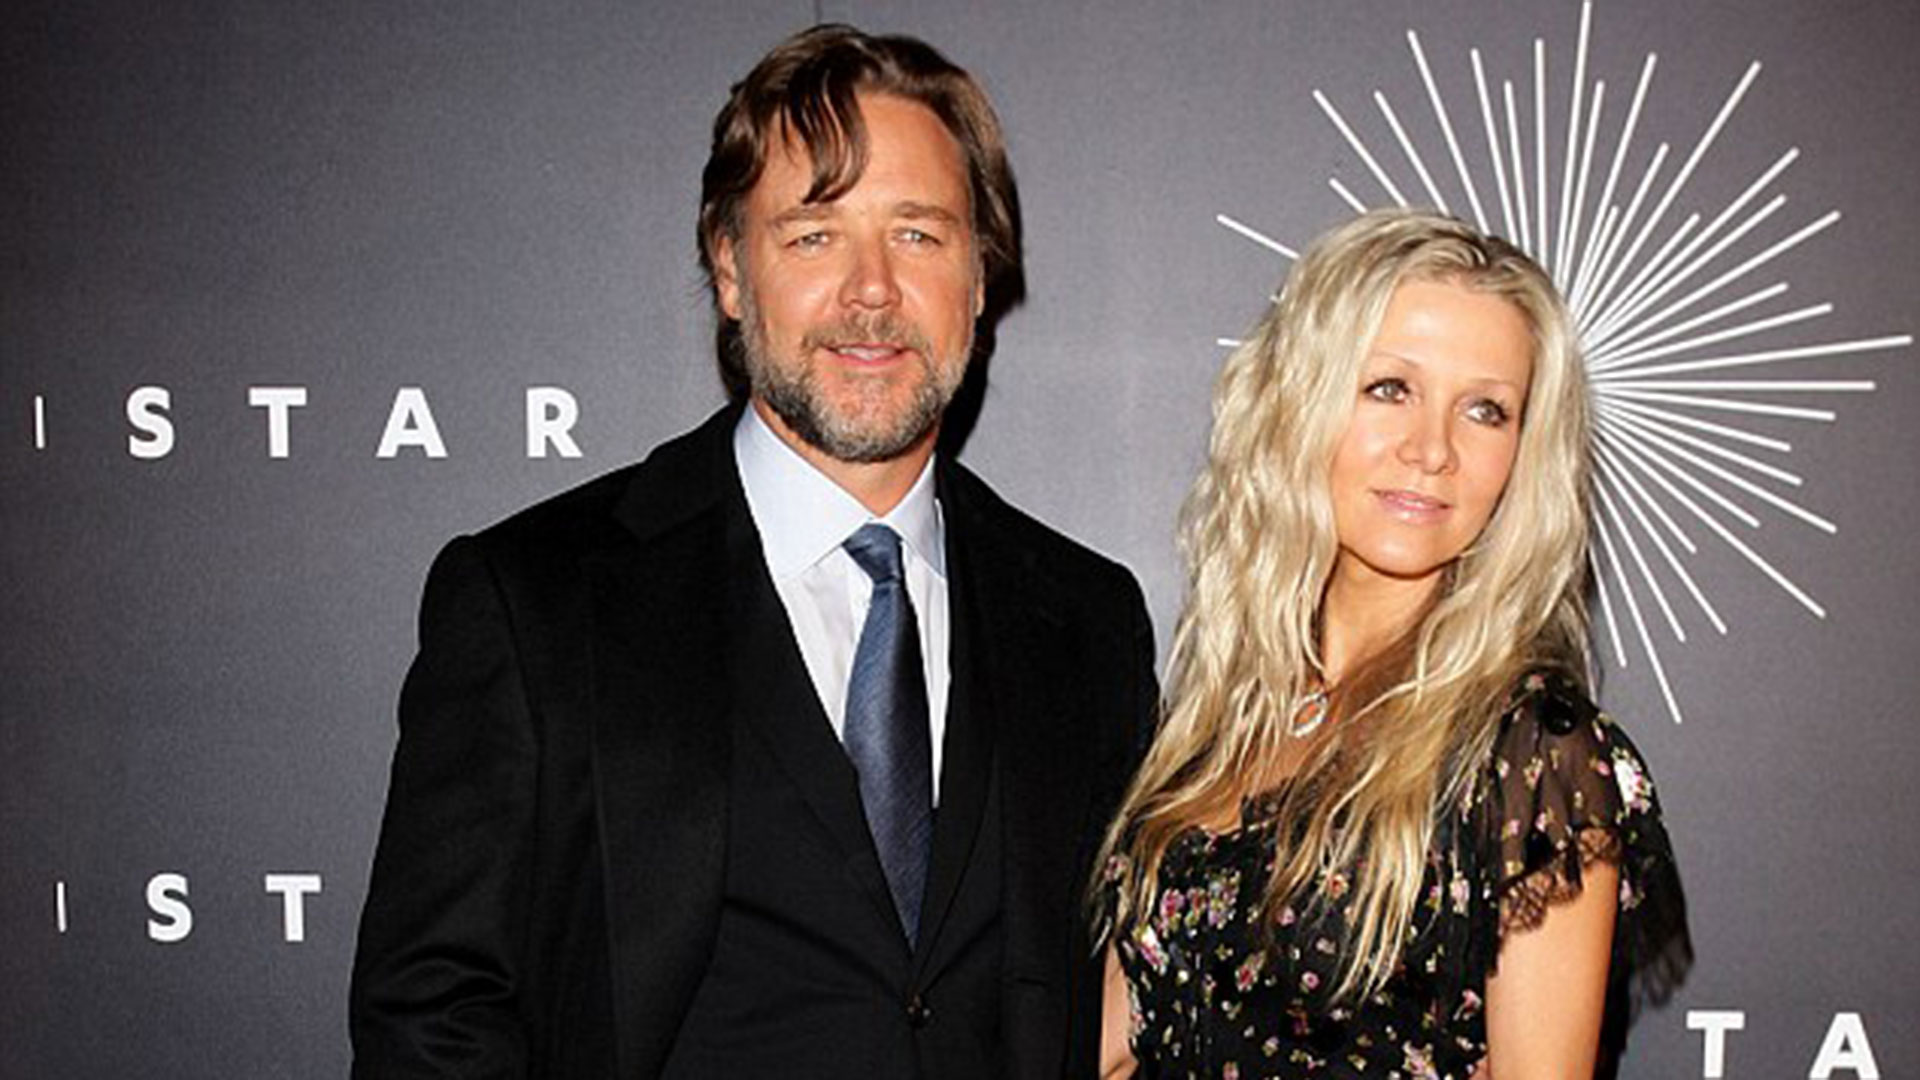 After breaking up with Meg Ryan, Crowe got back together with Danielle Spencer.  The reconciliation did not last long